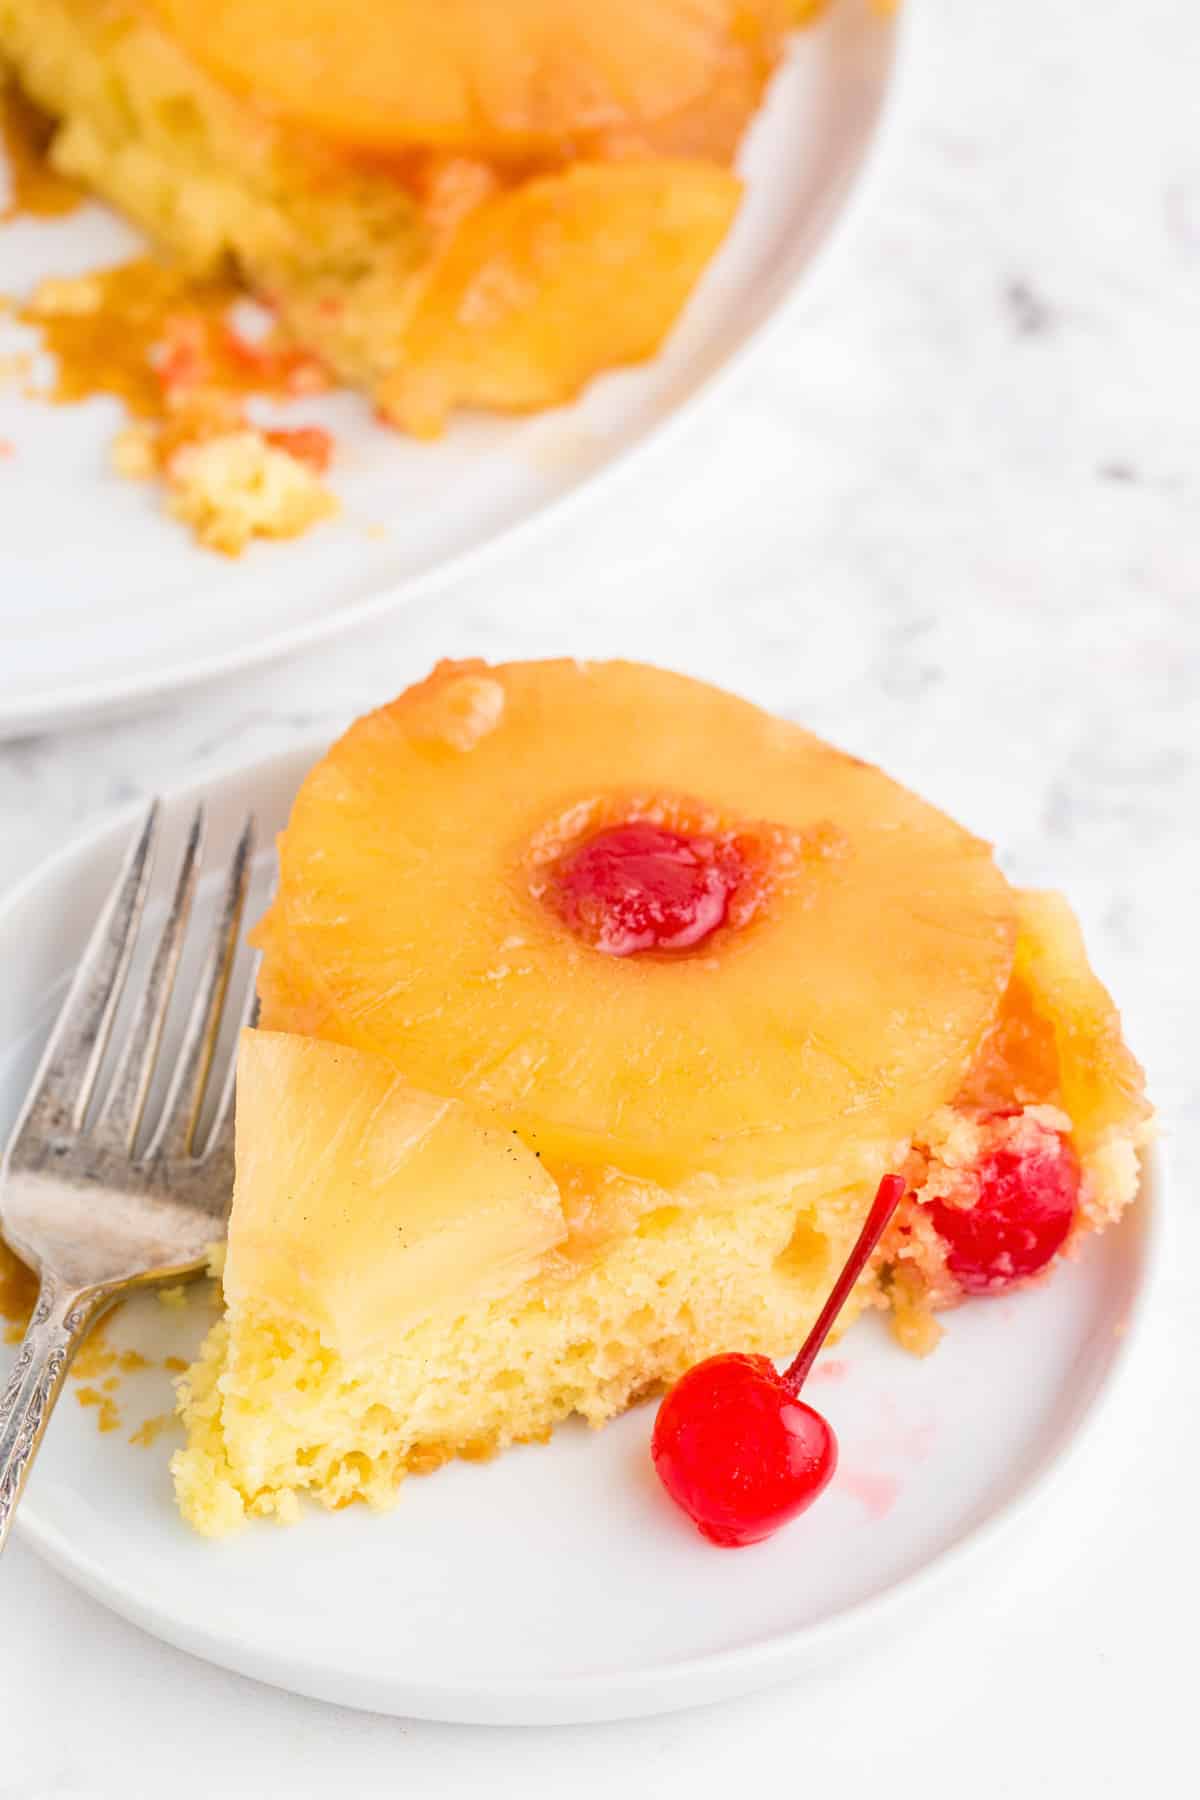 Slice of pineapple upside down cake on a serving plate with a metal fork, remaining pineapple upside down cake in the background.